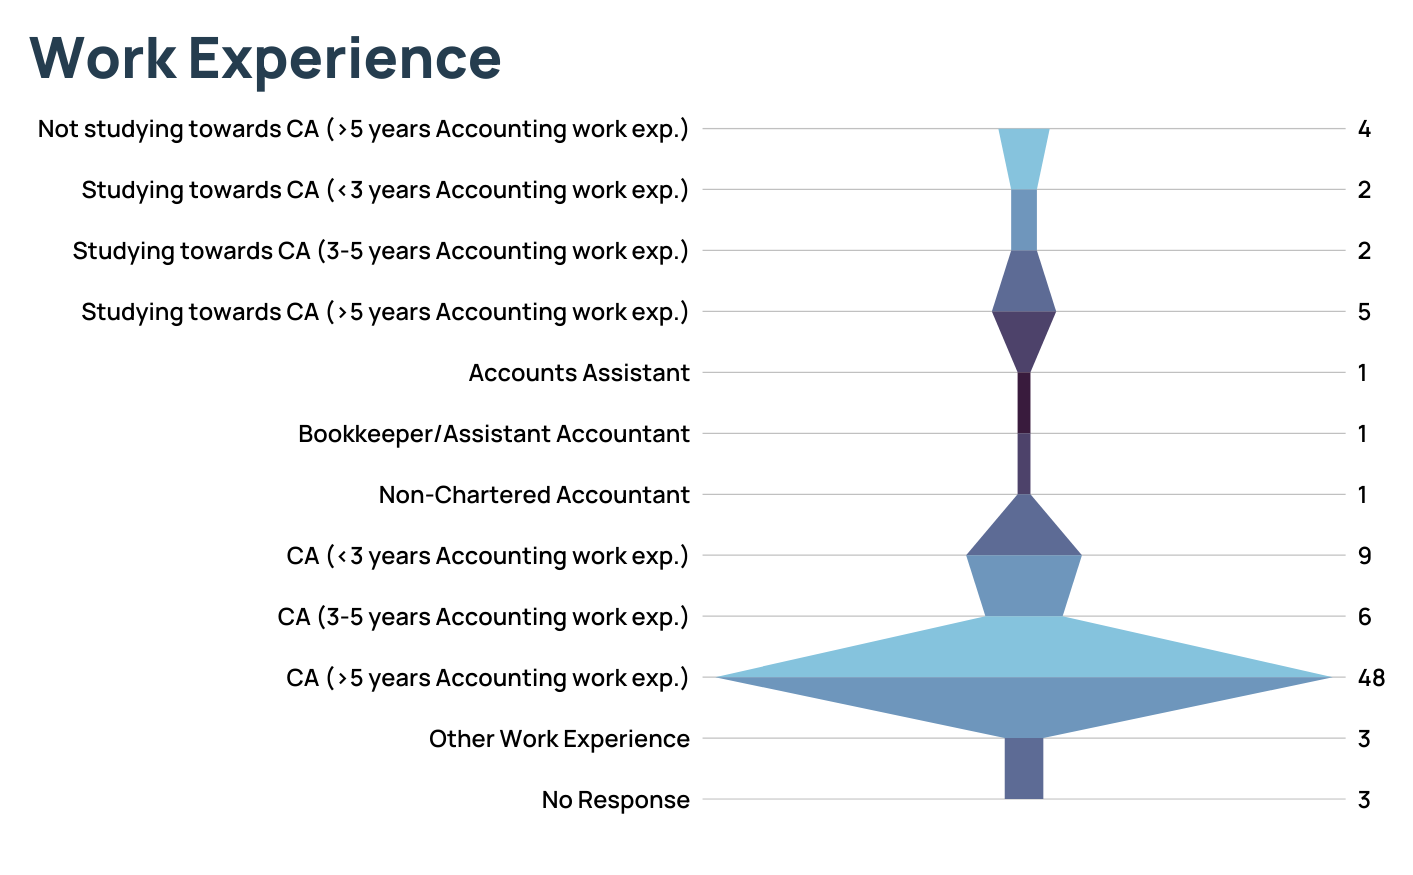 Int CPA Work Experience